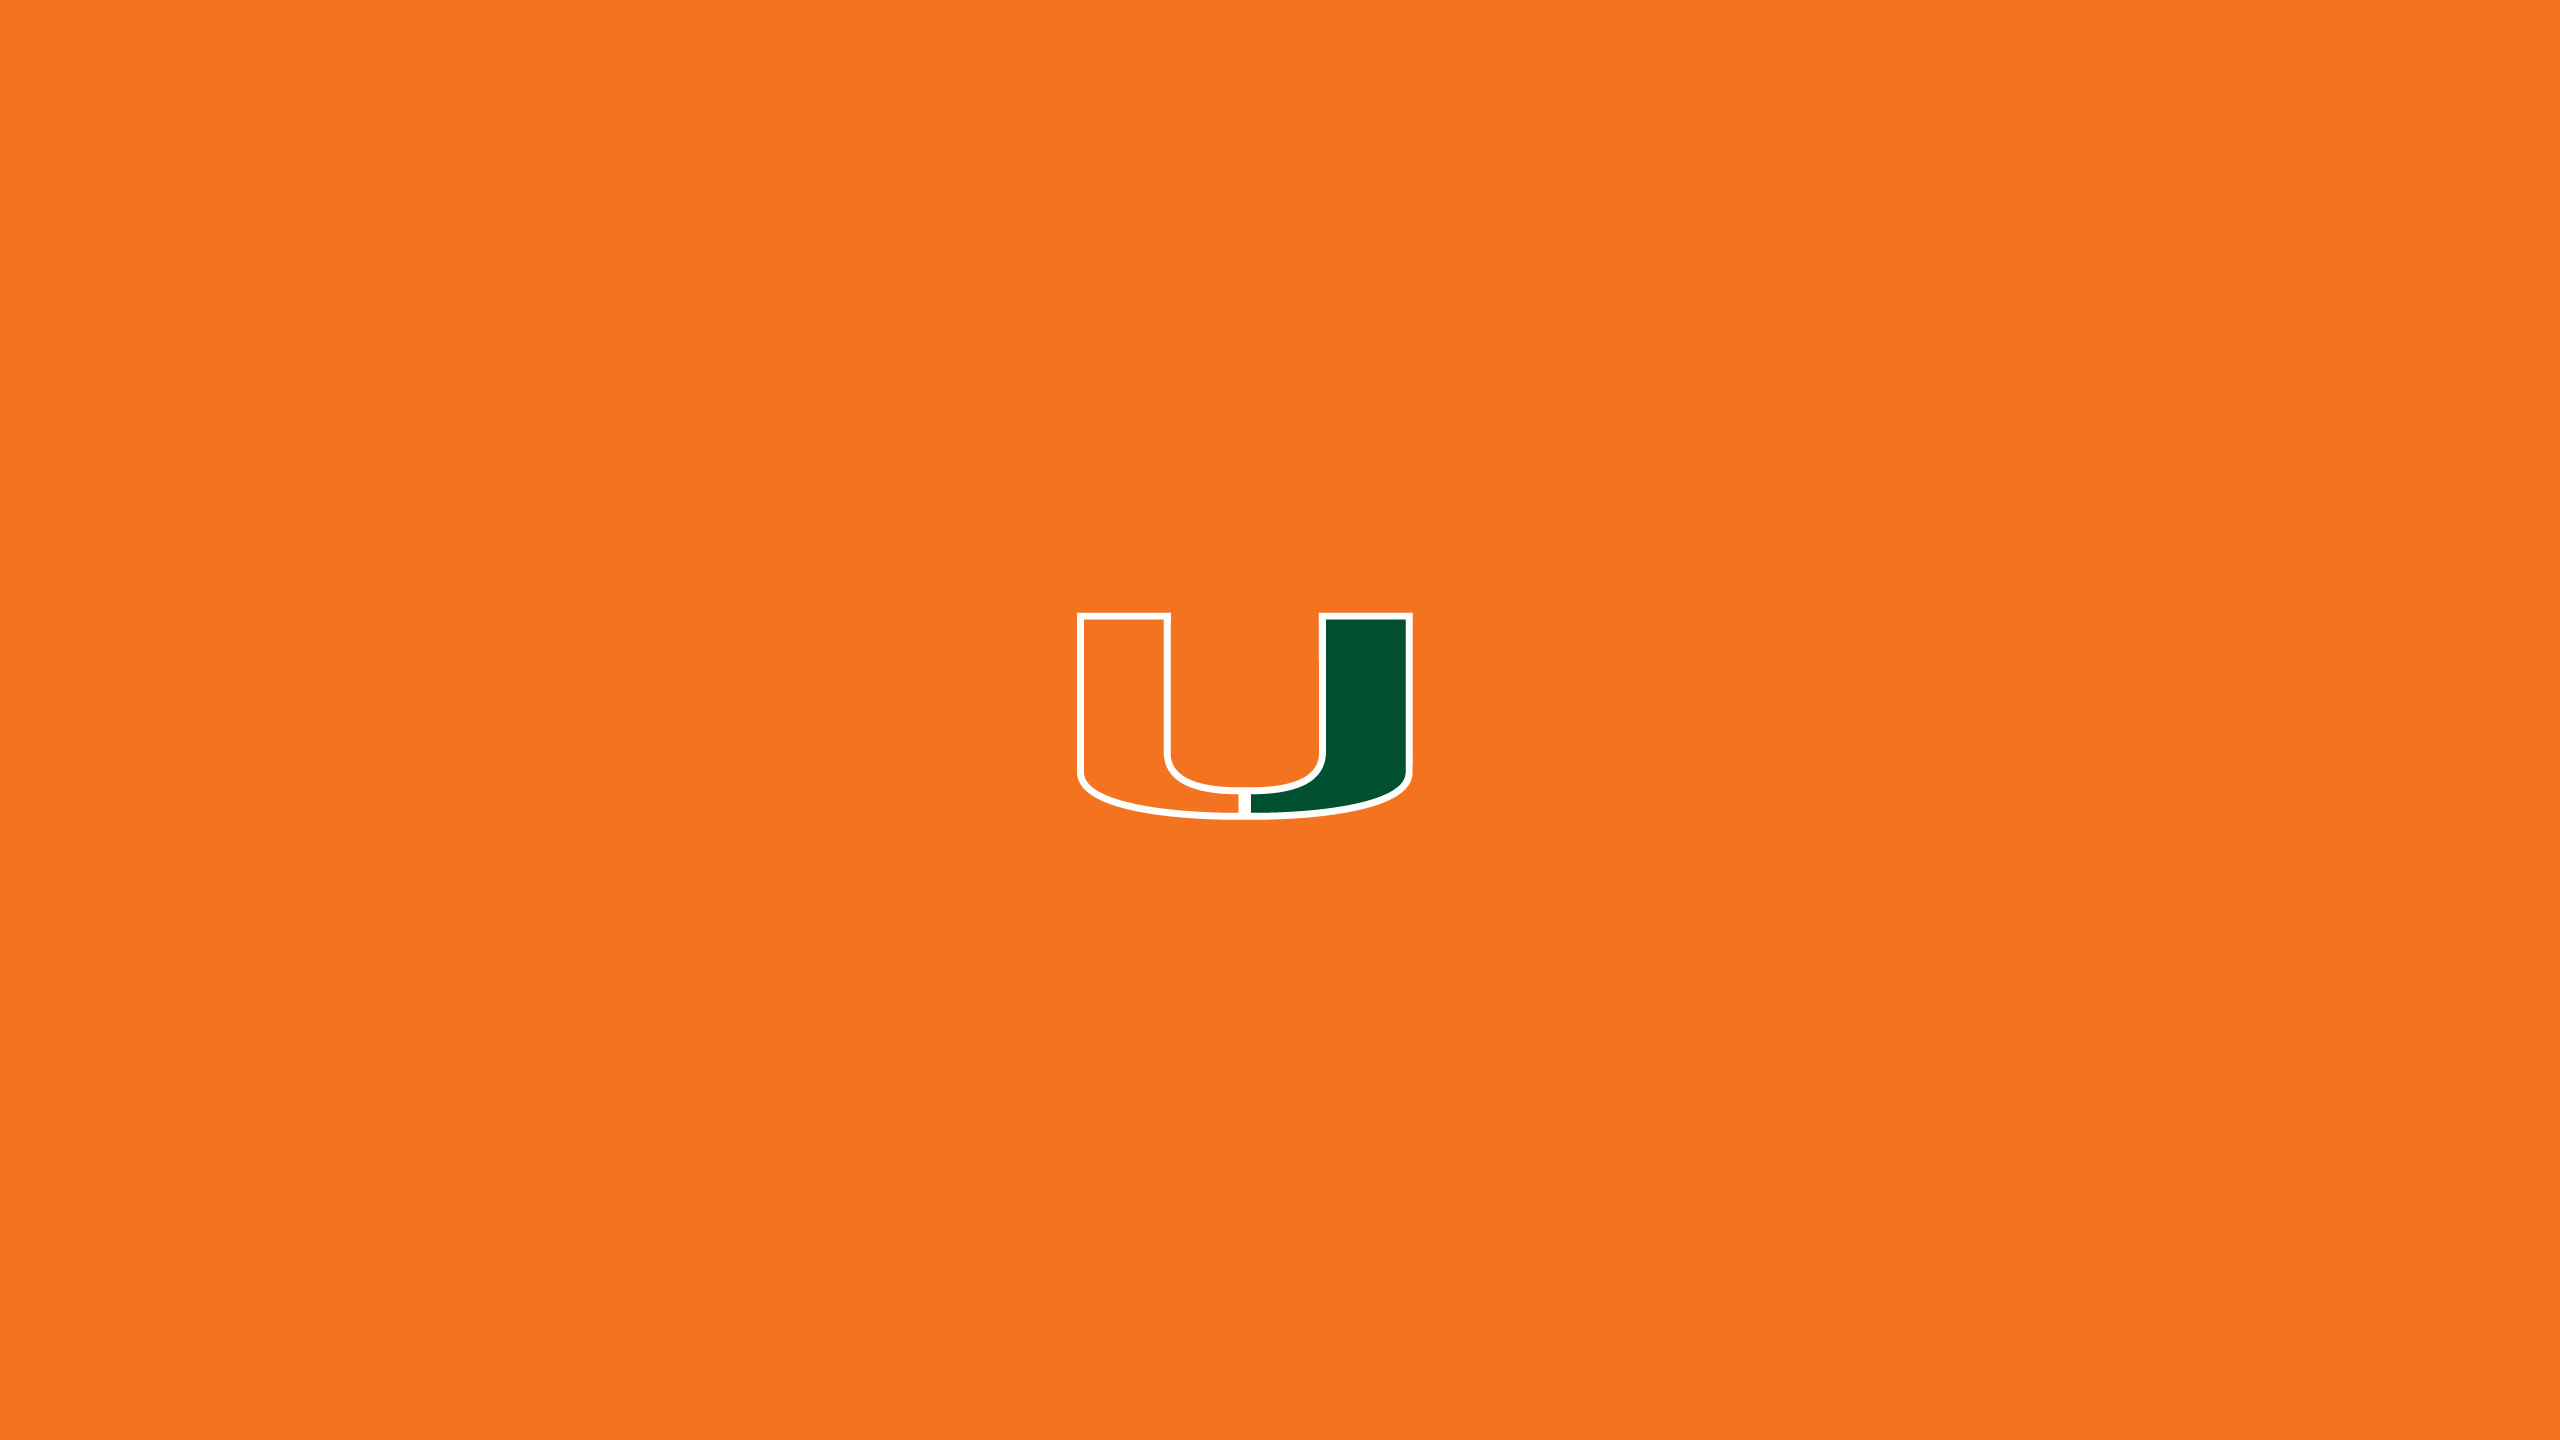 2560x1440 Preview University Miami Images by Herman Fairholm